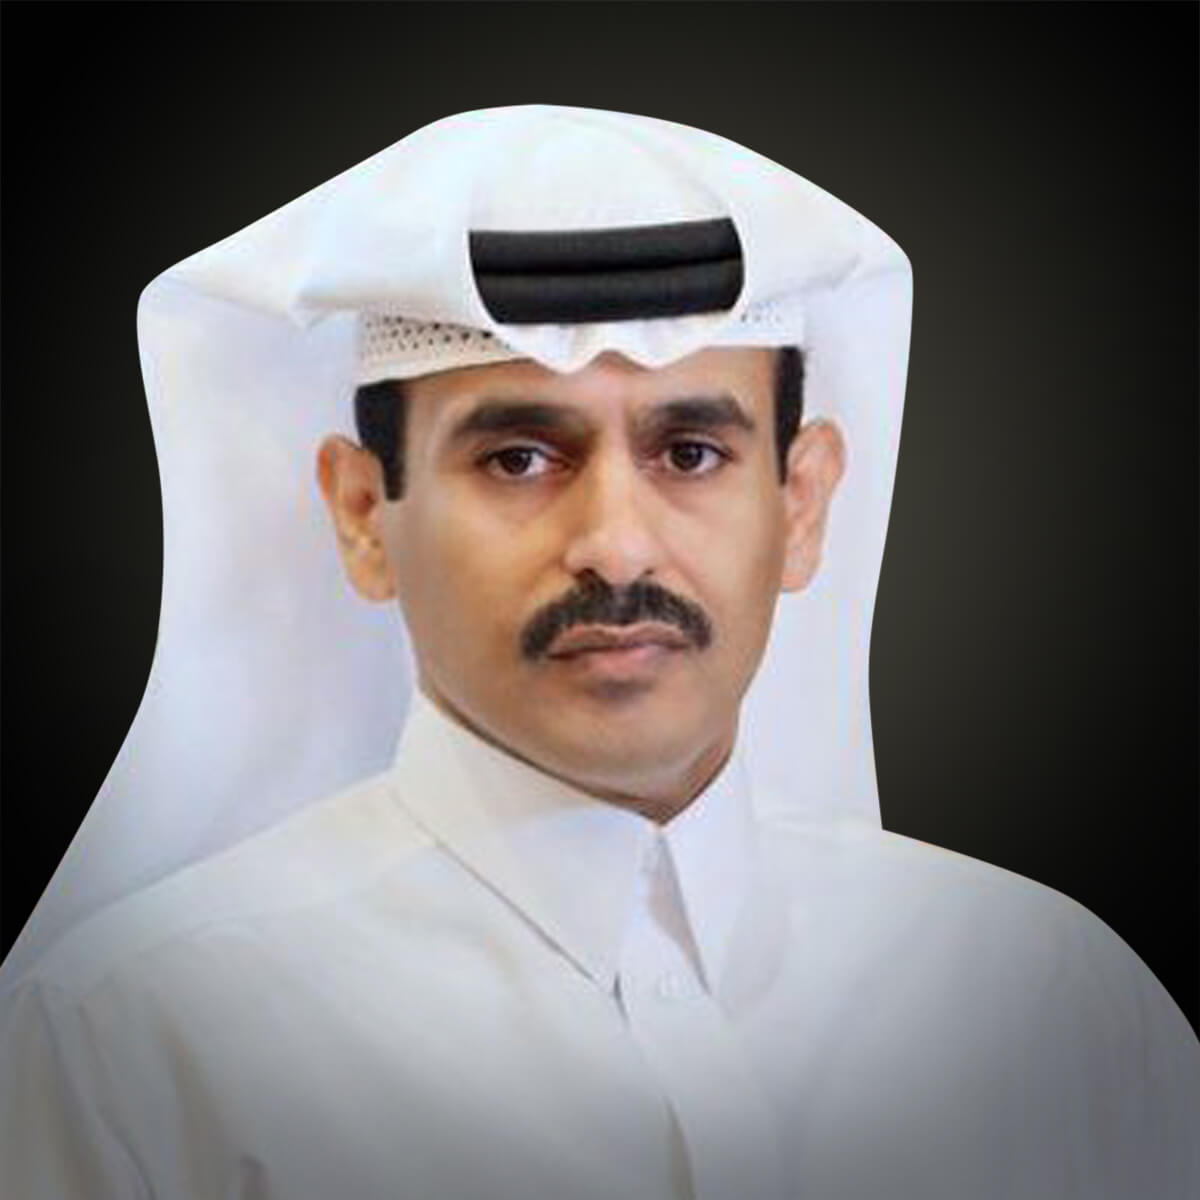 Qataris on Forbes’ list of most powerful CEOs